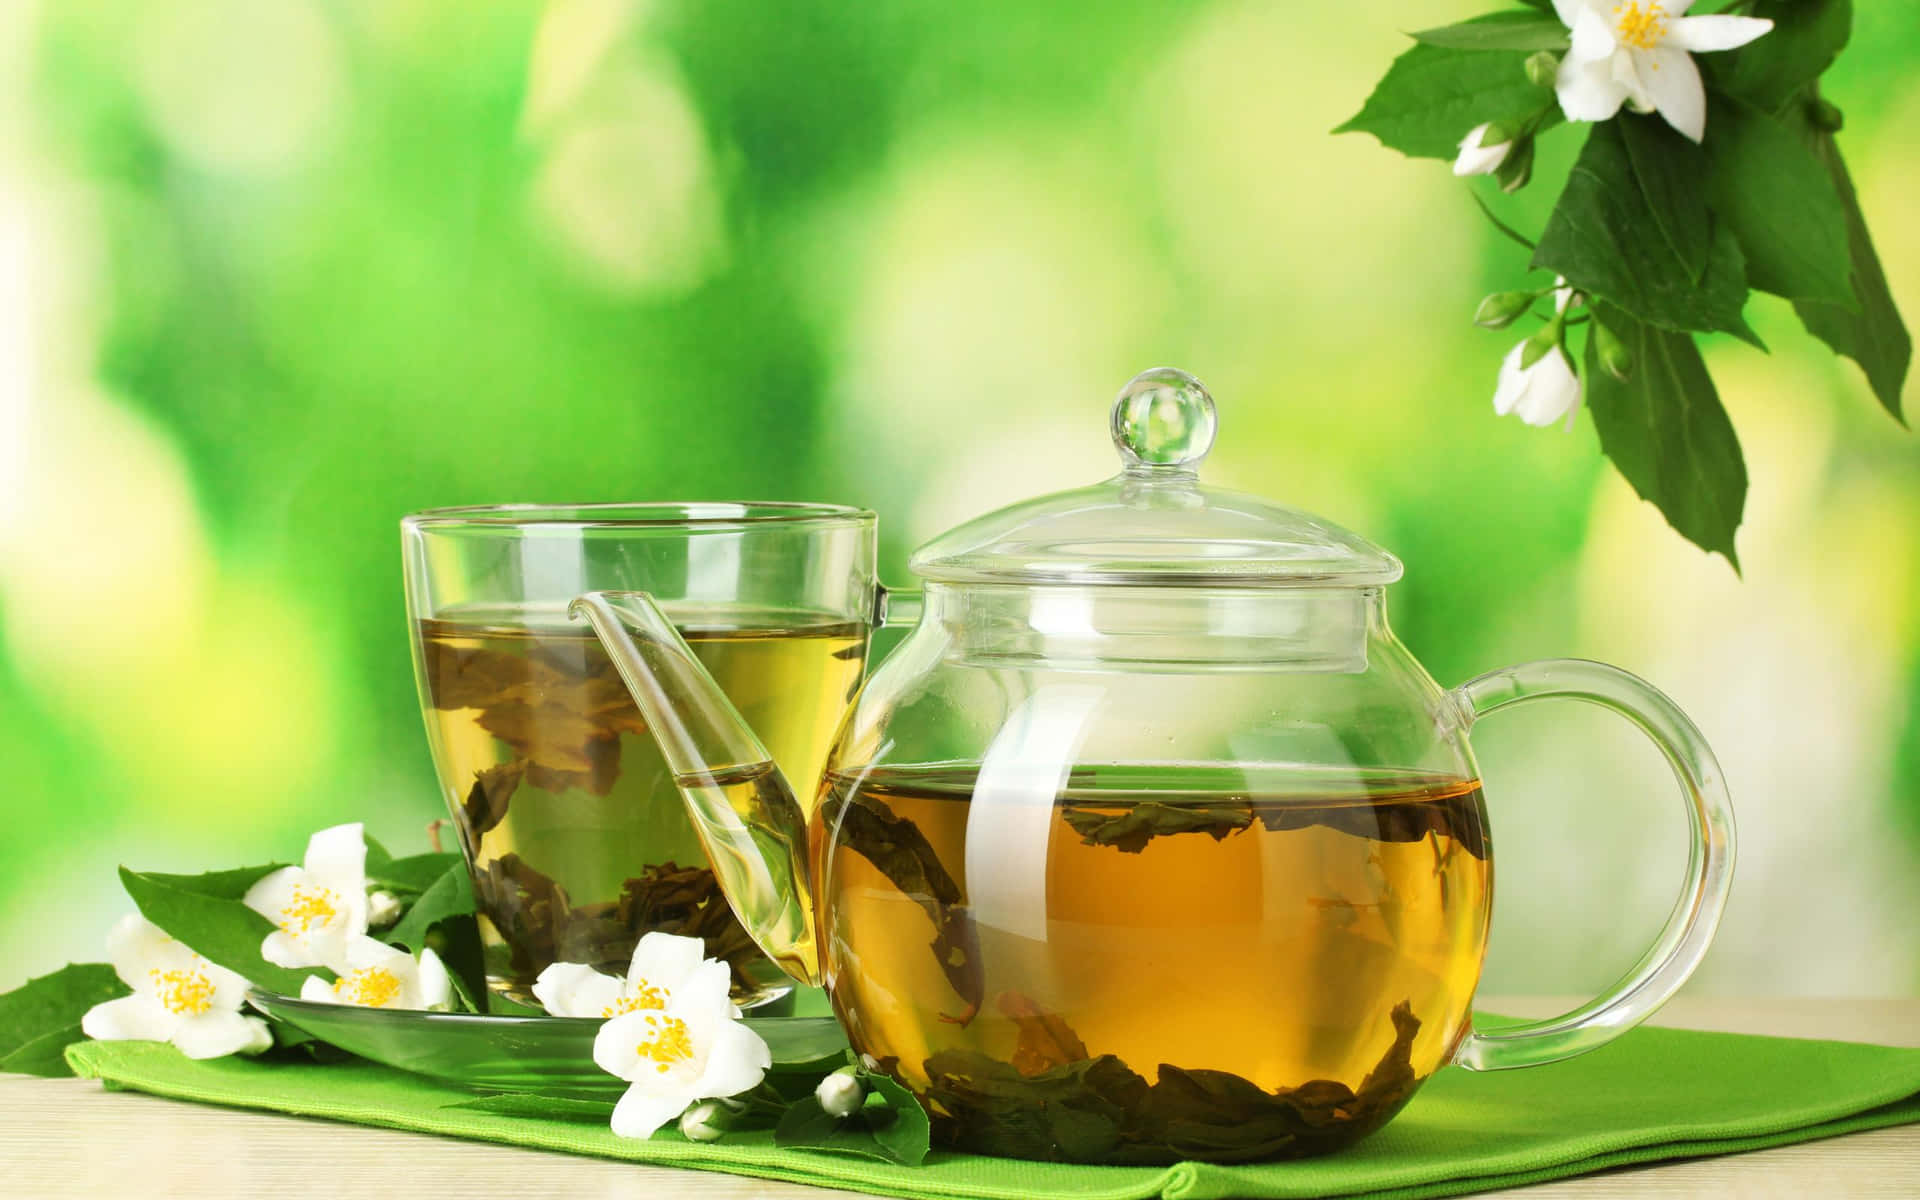 Green Tea With Flowers And Leaves